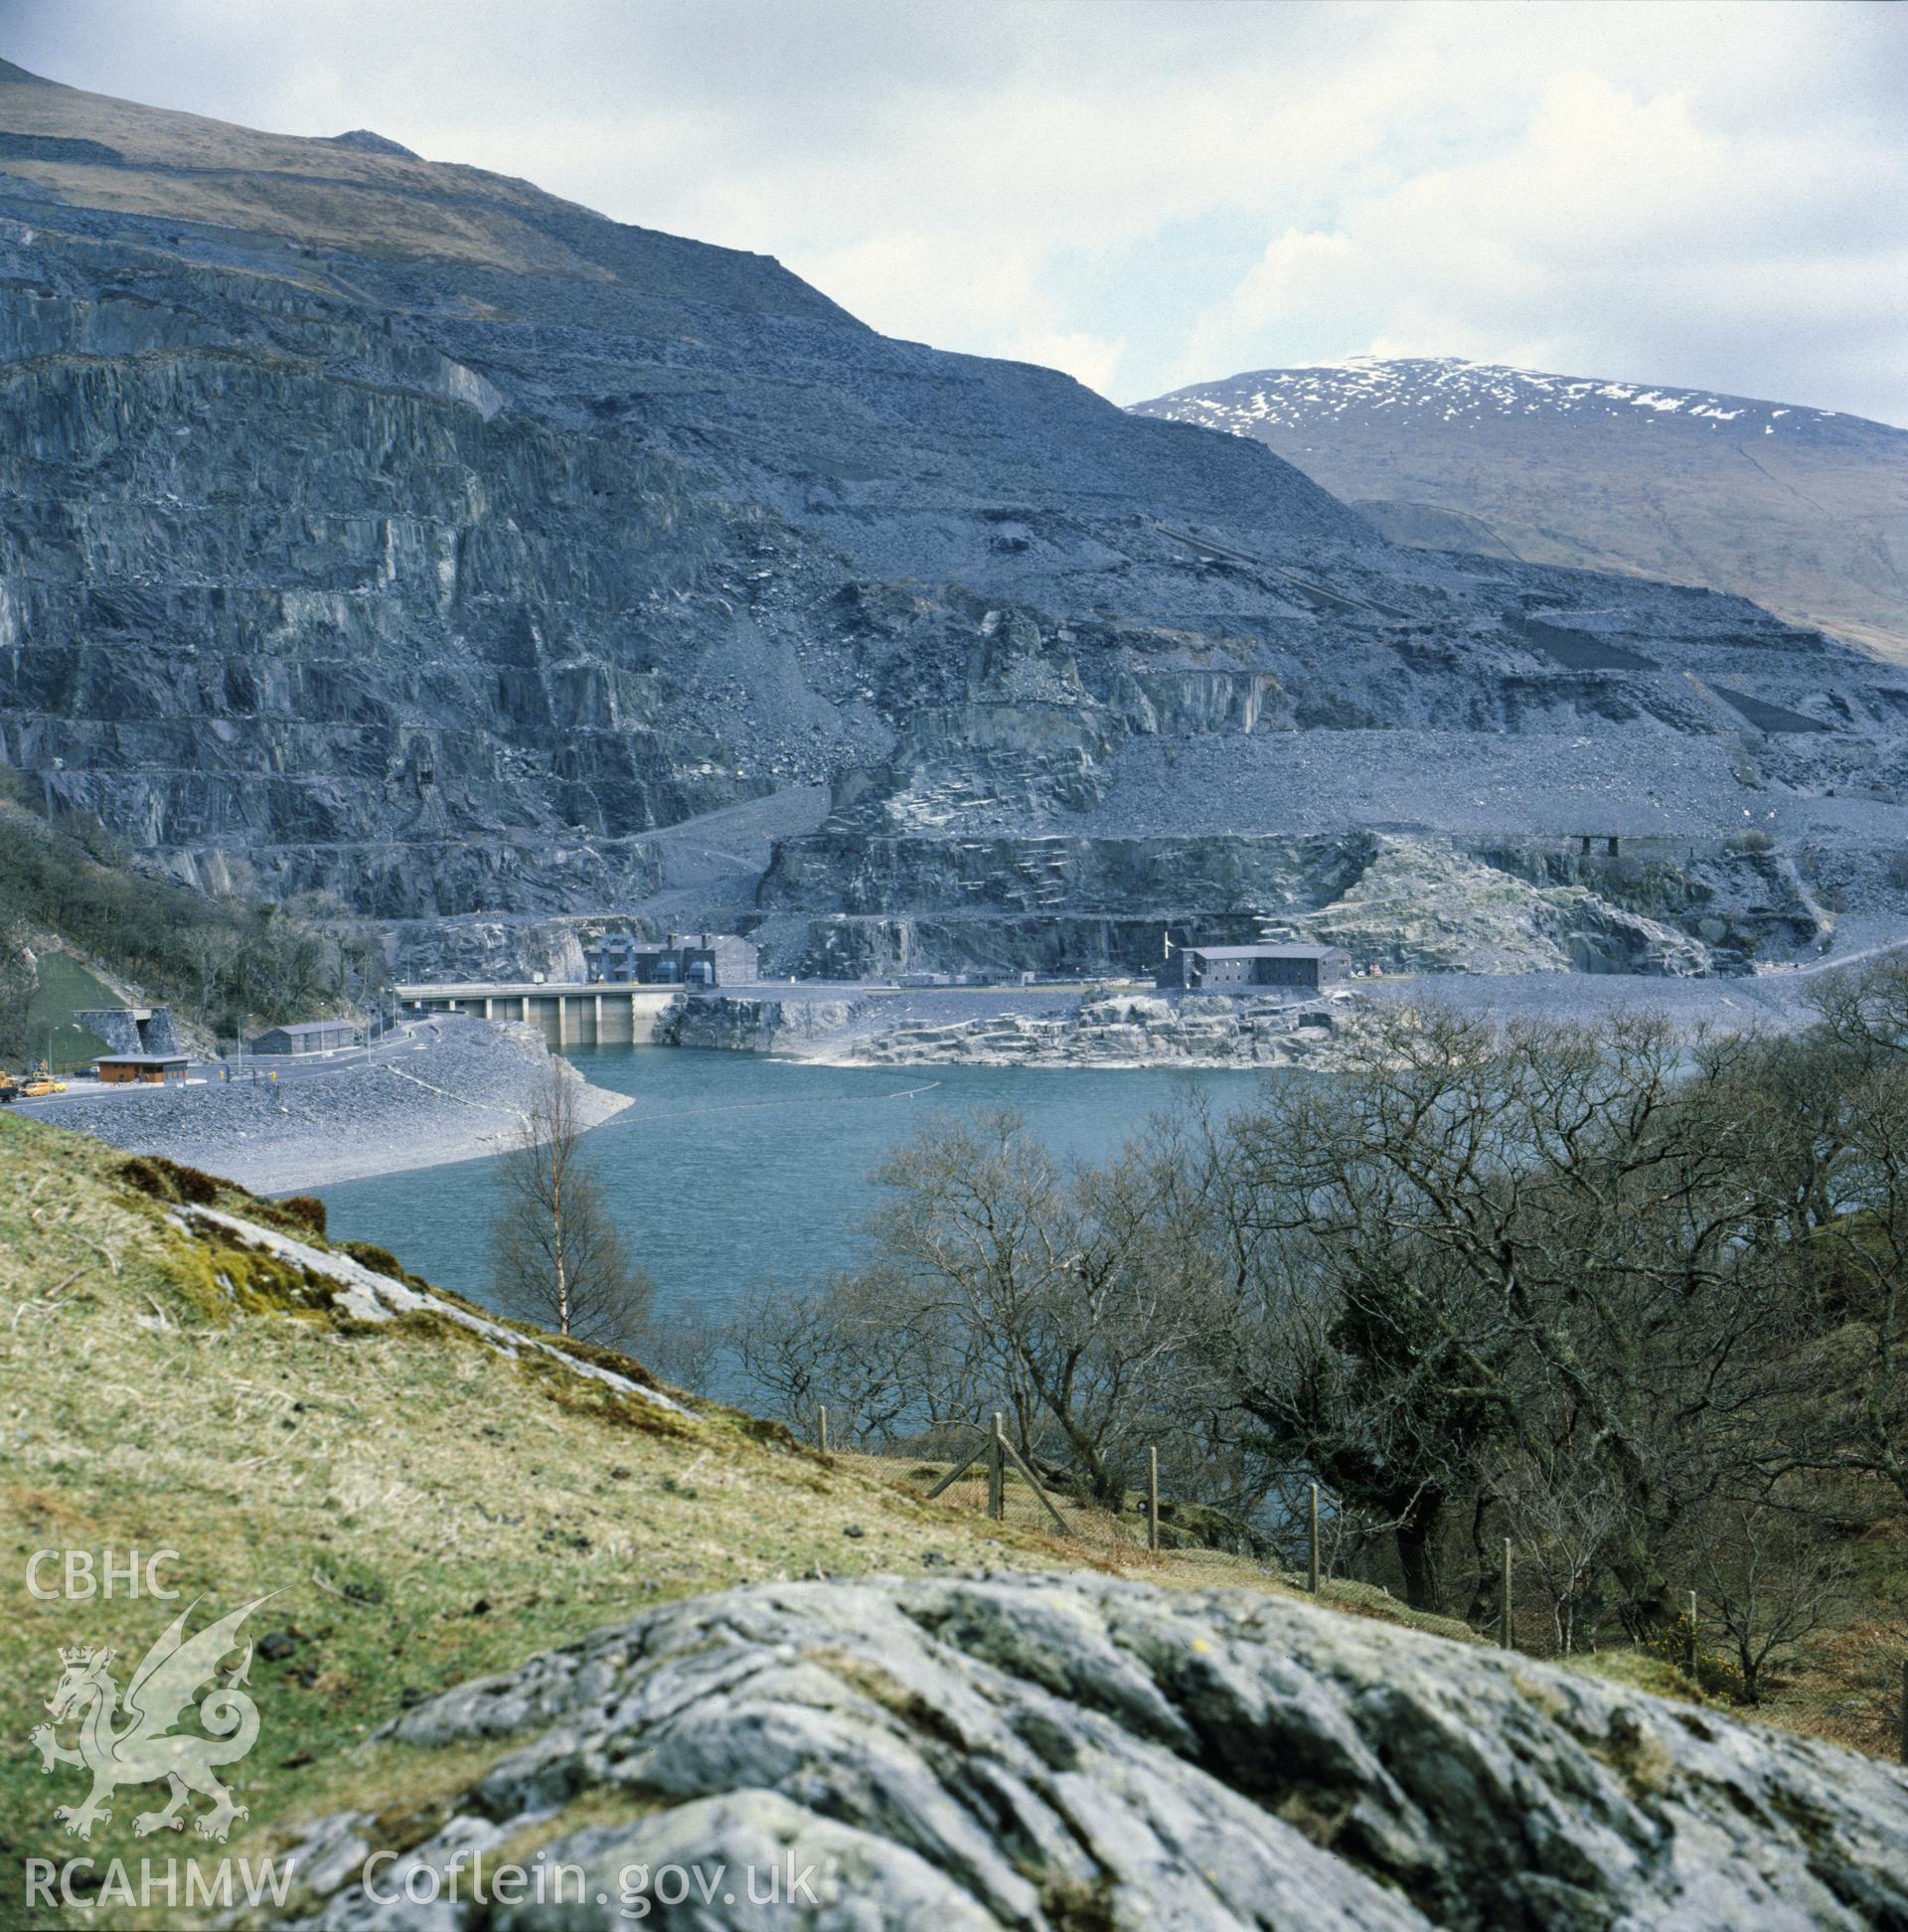 1 colour transparency showing view across Llyn Peris looking towards the main entrance at Dinorwig Power Station; collated by the former Central Office of Information.